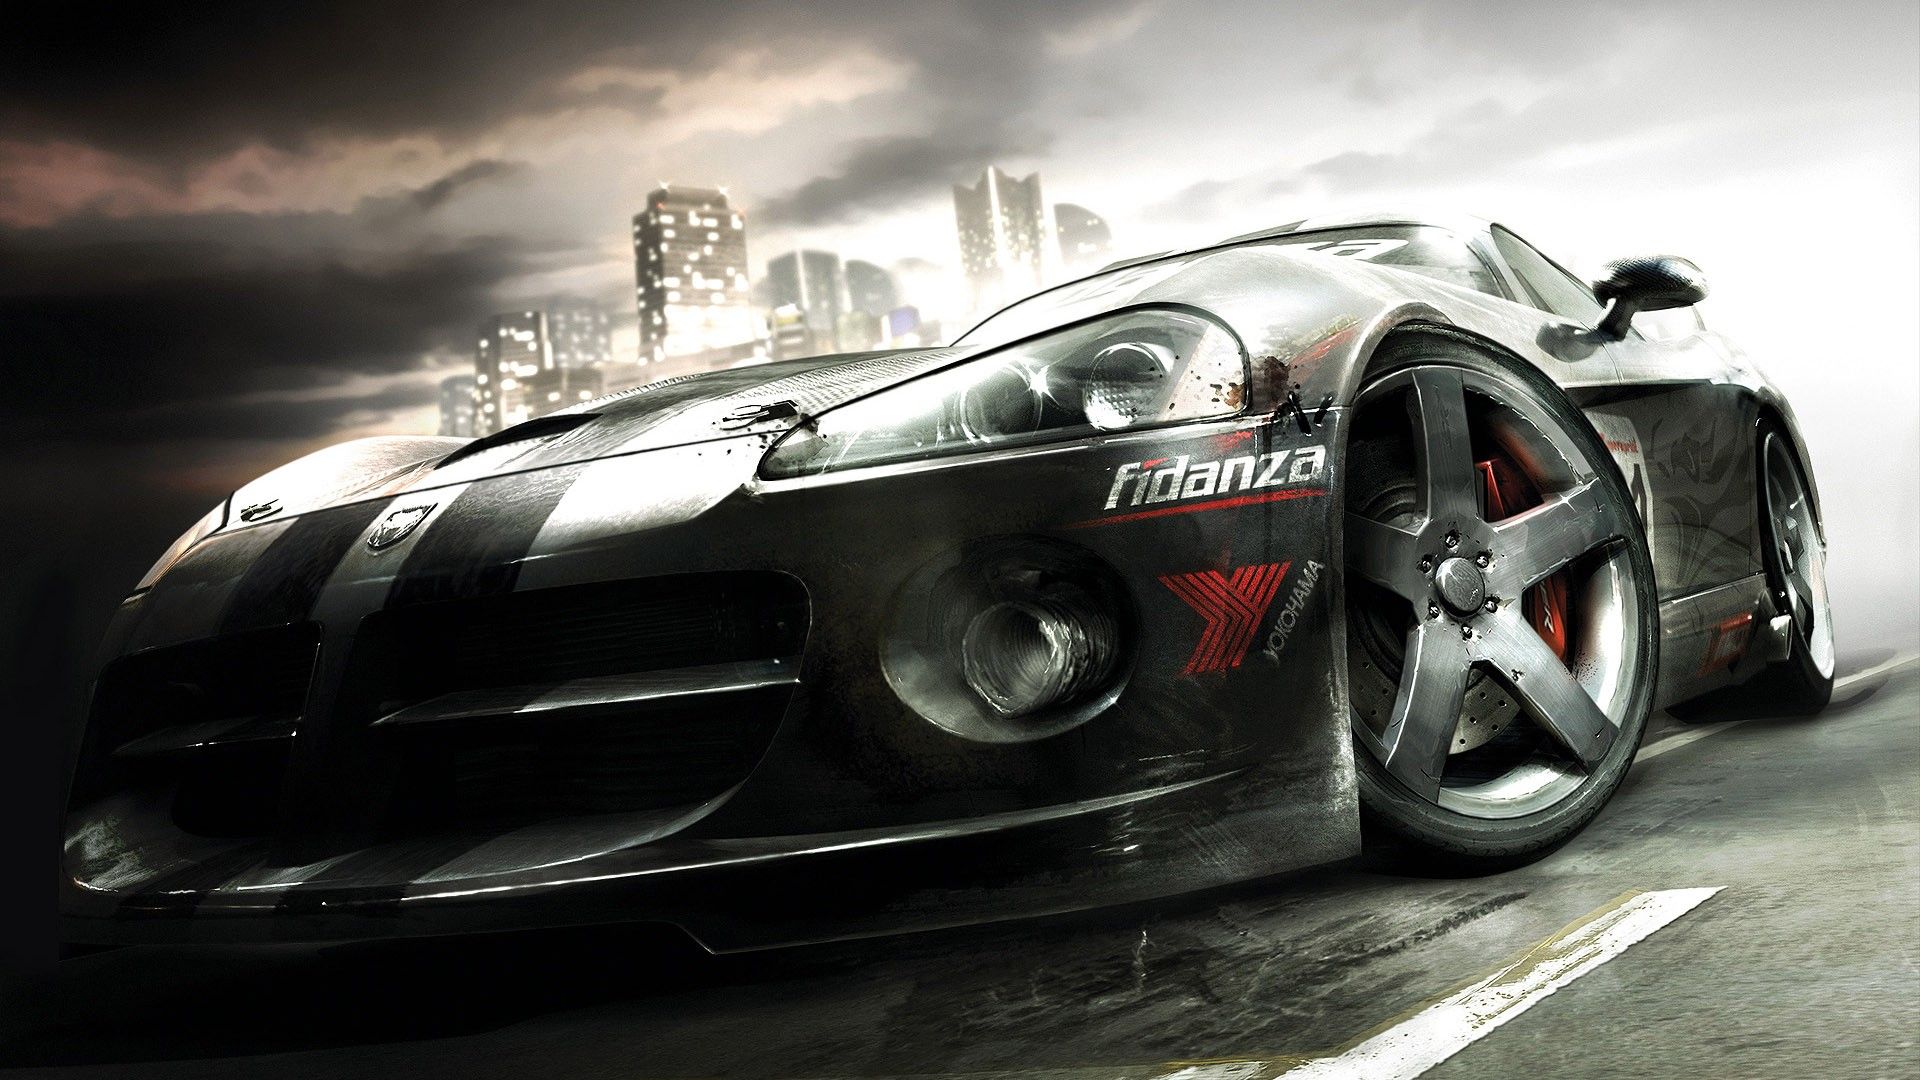 Art, cars, deadly, furiously, awesome, chase, wallpaper, digital, illustrations, car, game, graphics